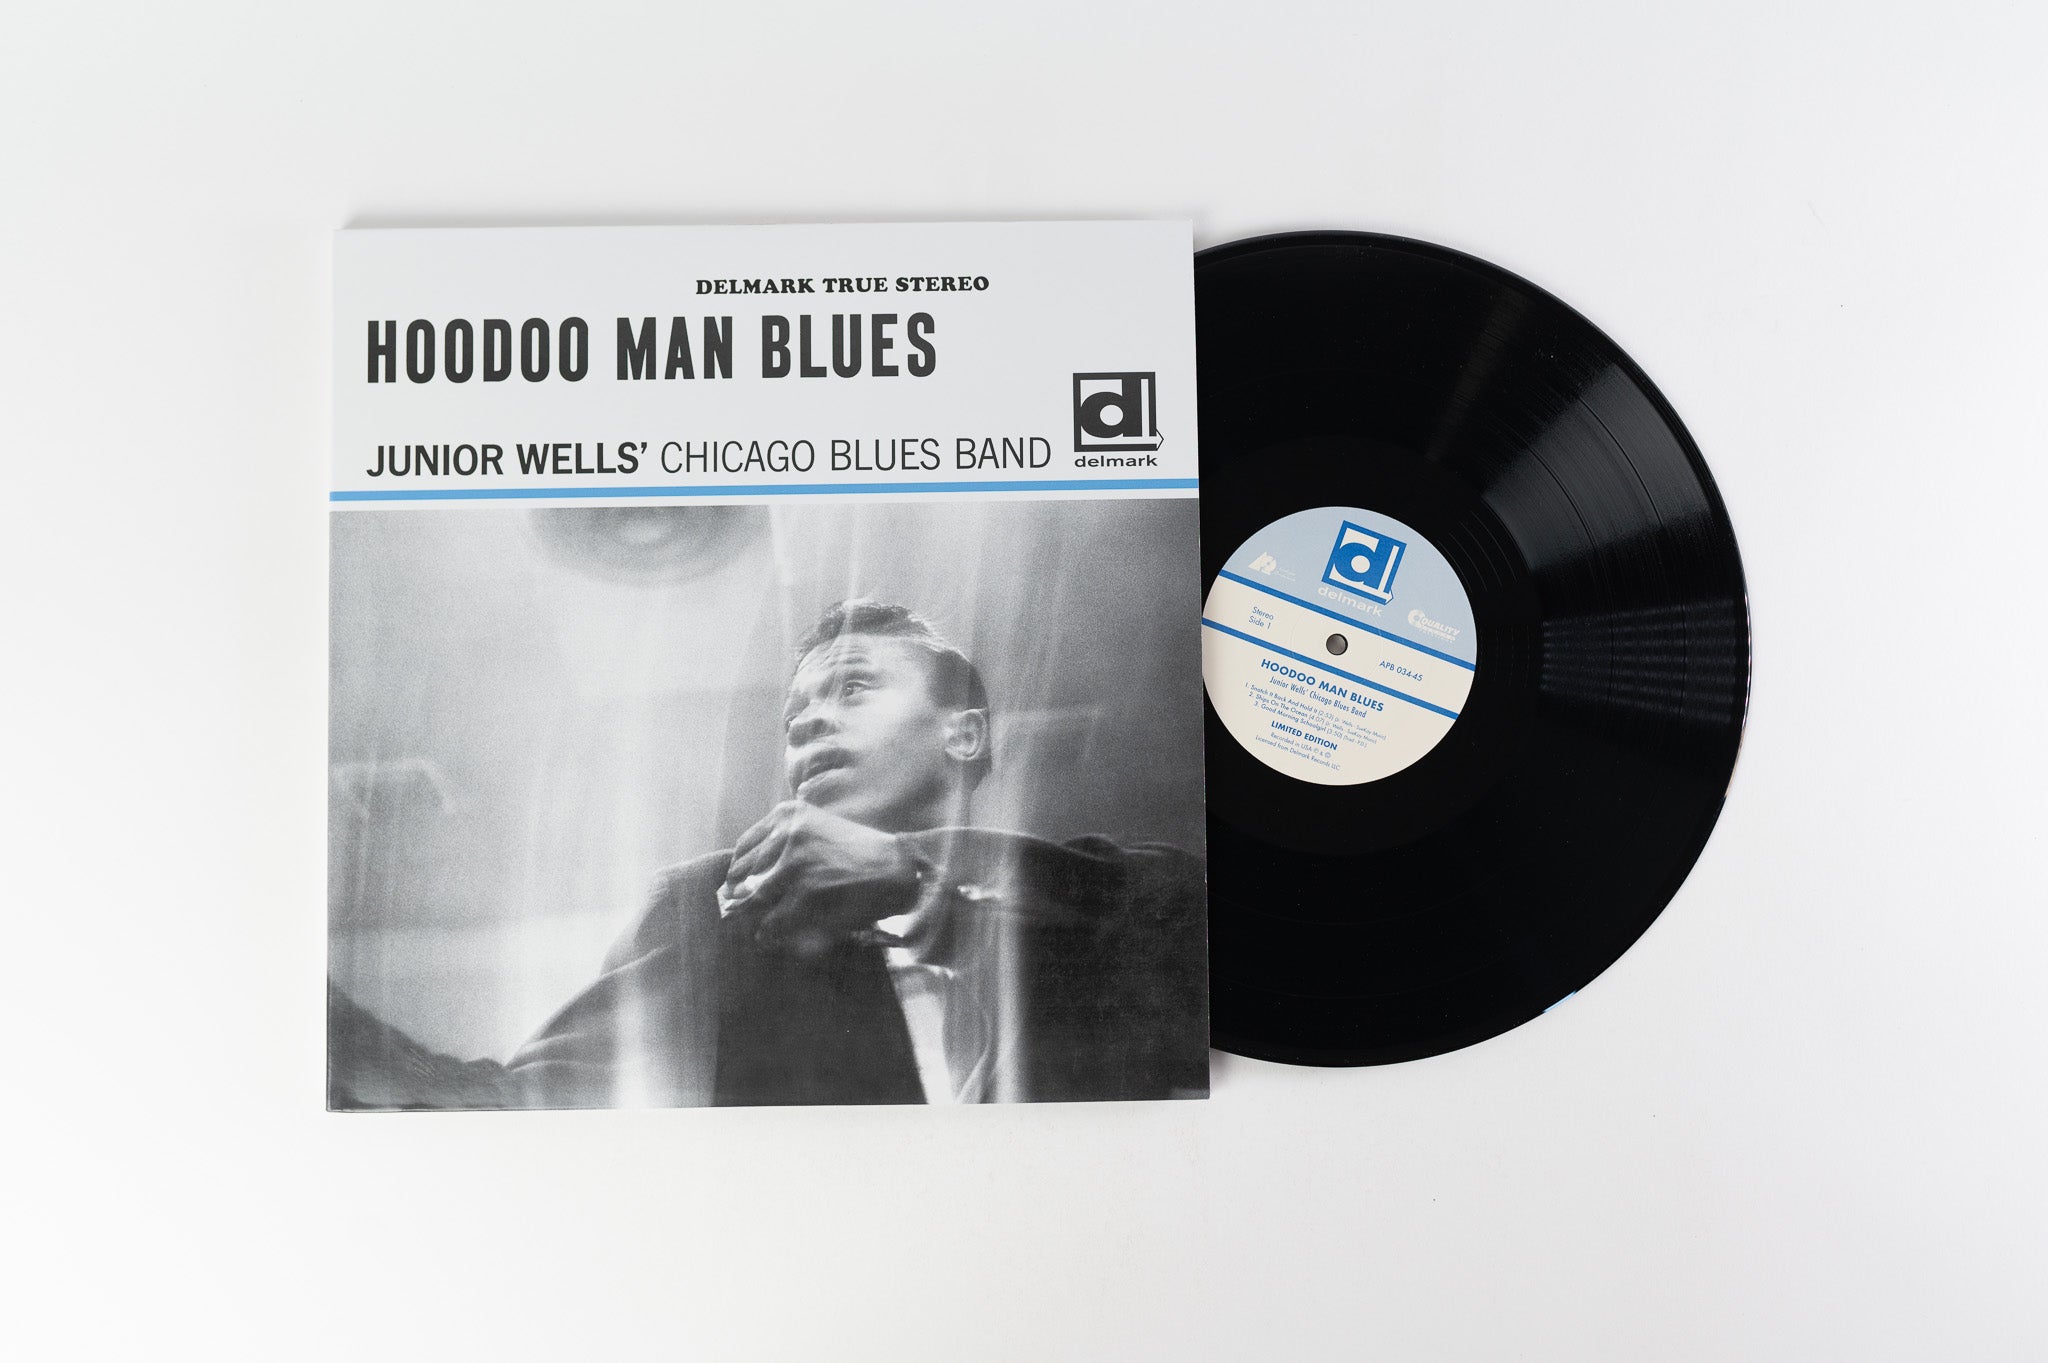 Junior Wells' Chicago Blues Band - Hoodoo Man Blues Reissue 45 RPM on Analogue Productions